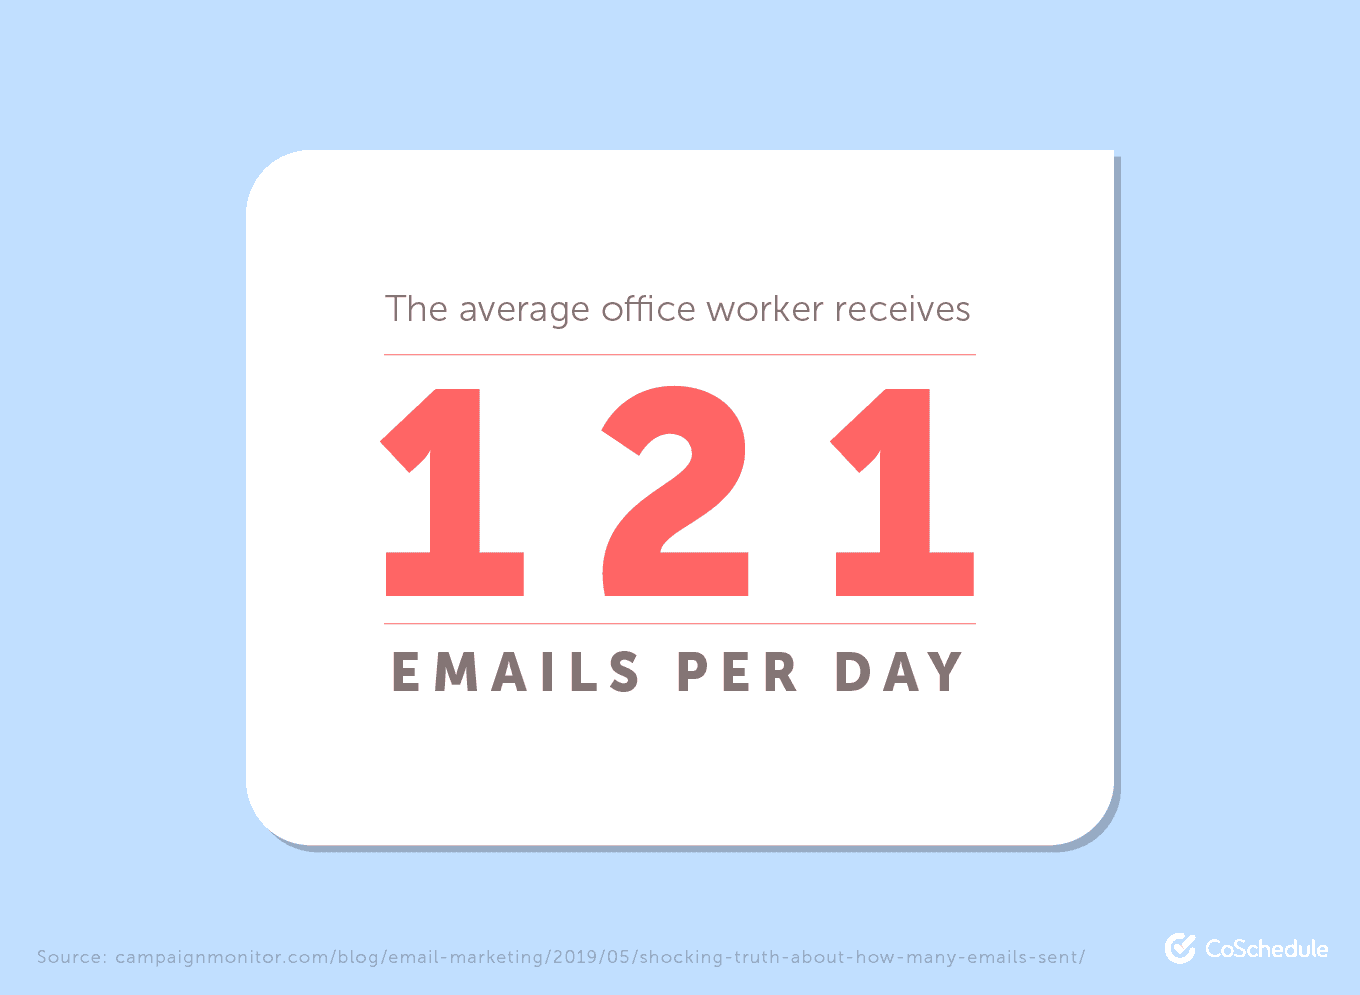 The average office worker receives 121 emails per day